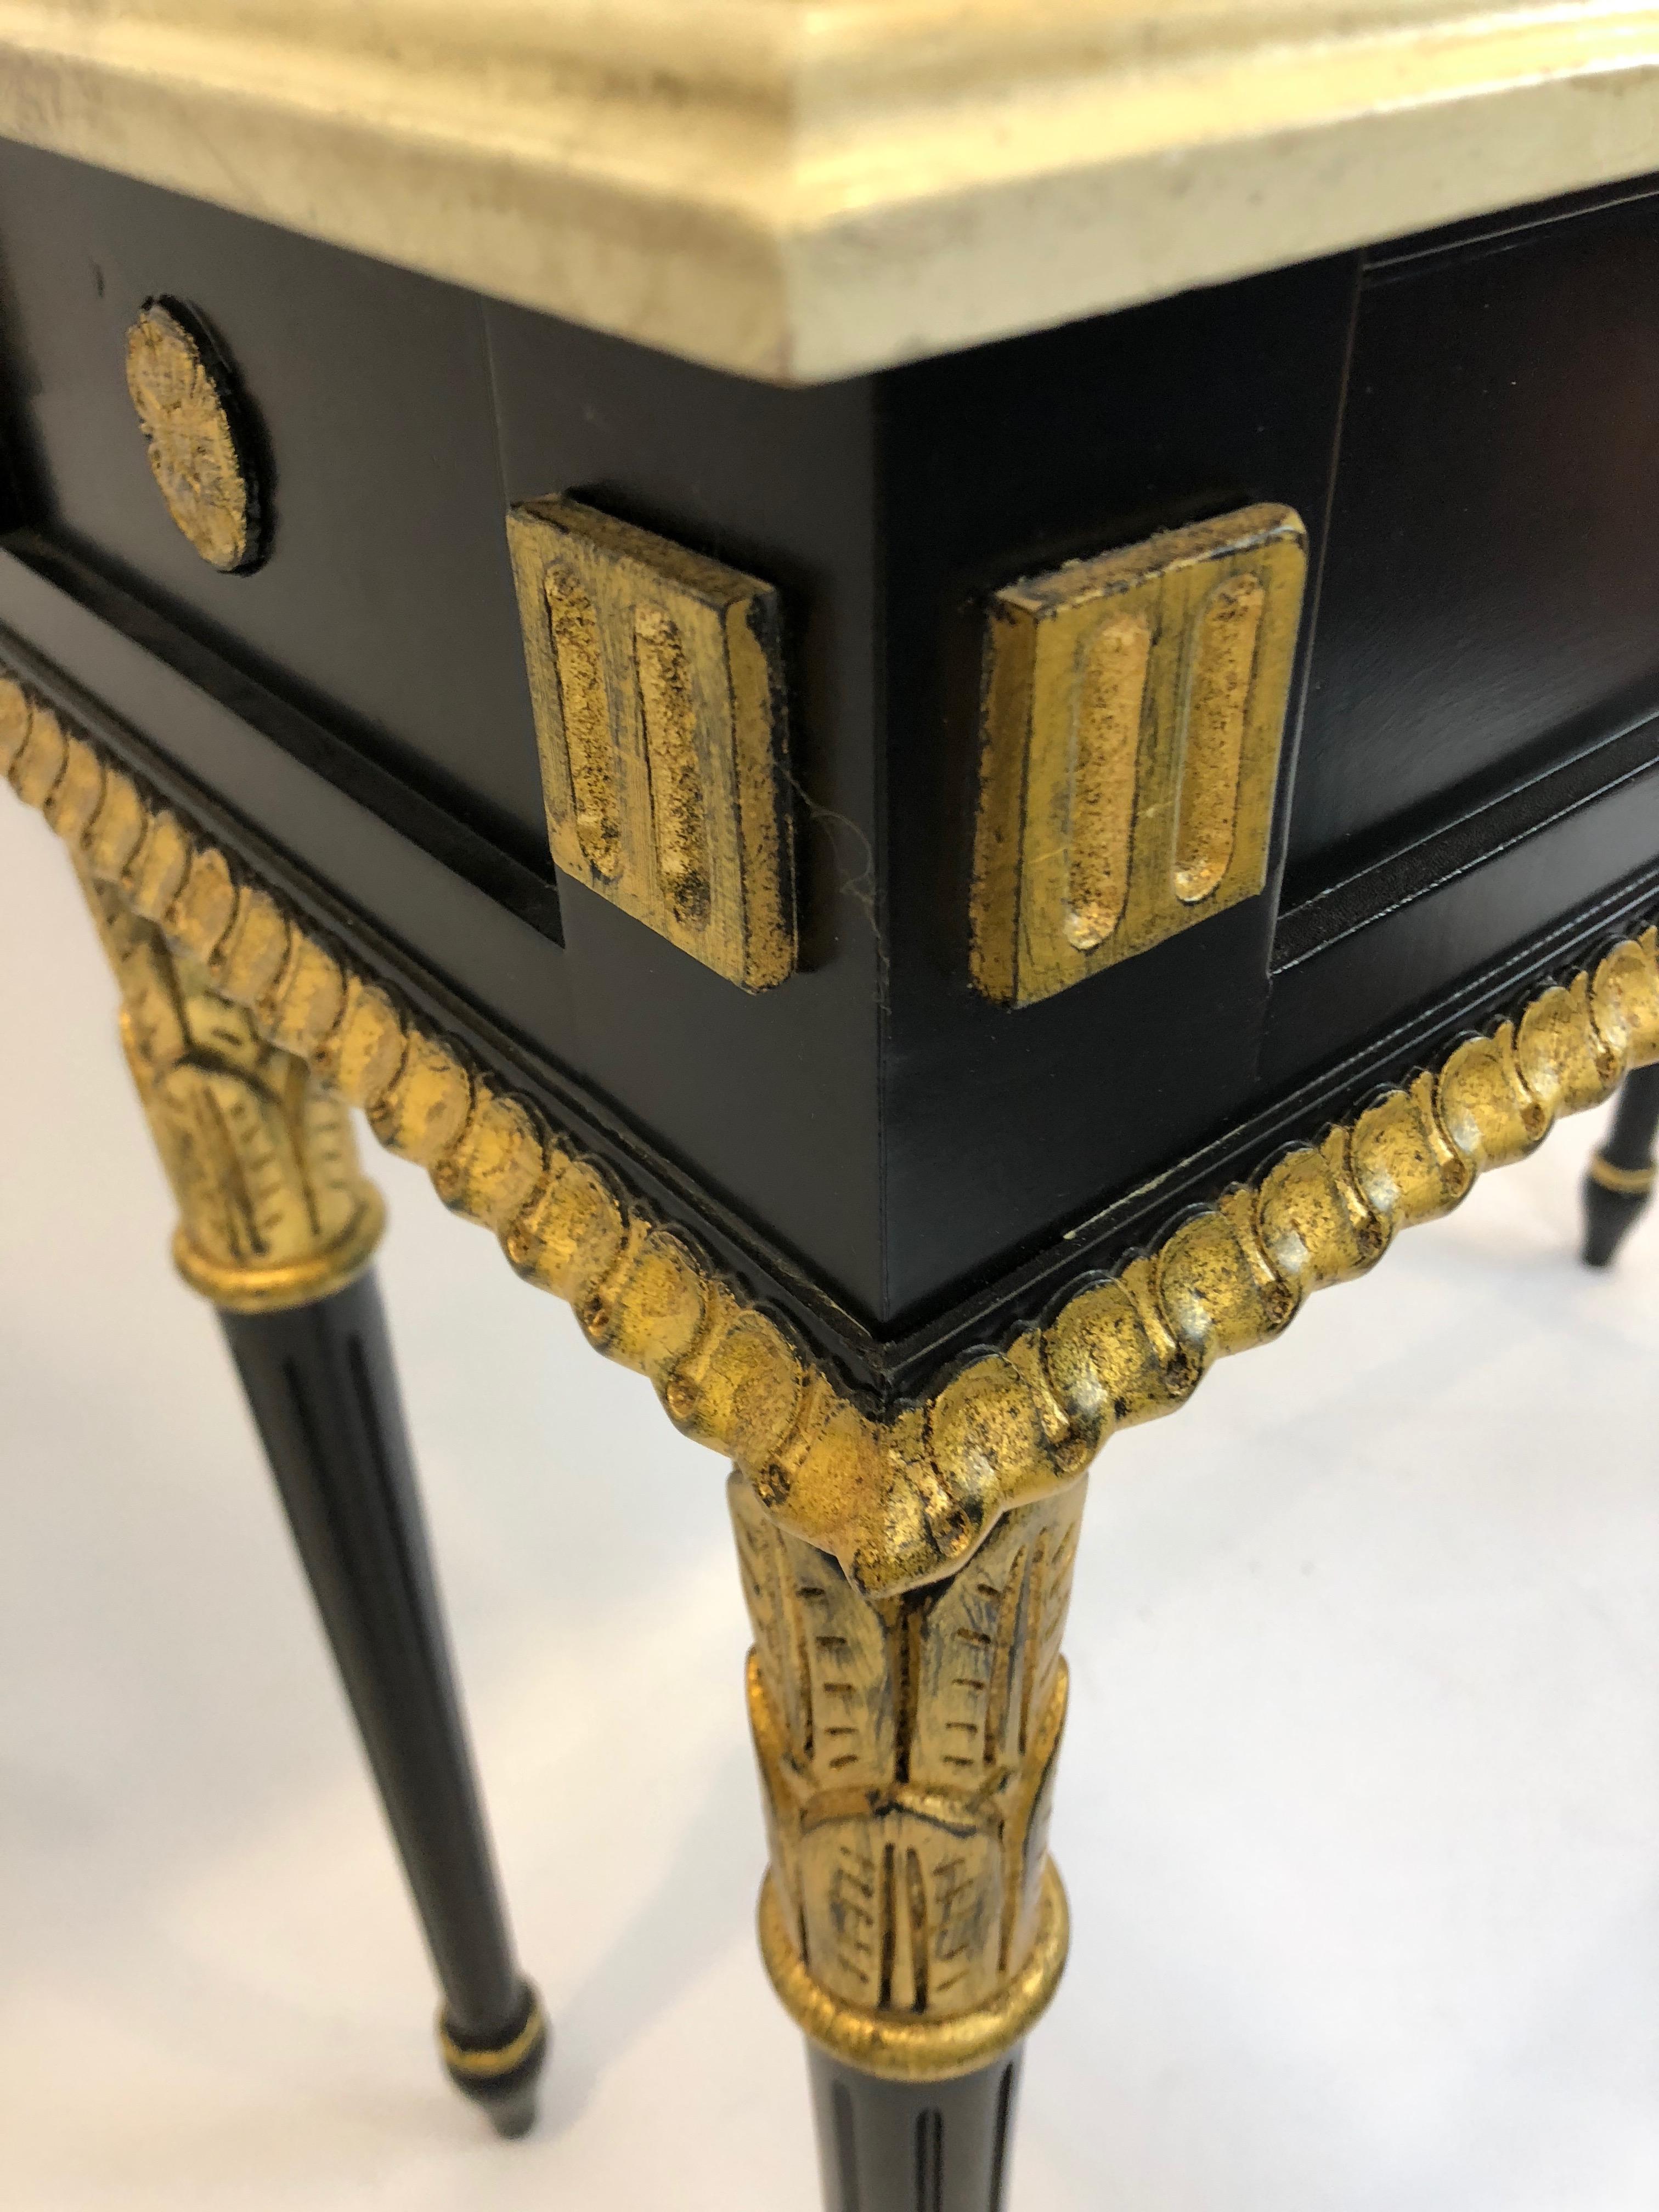 Glamorous Regency Style Black and Gilded Console Table with Faux Marble Top 1